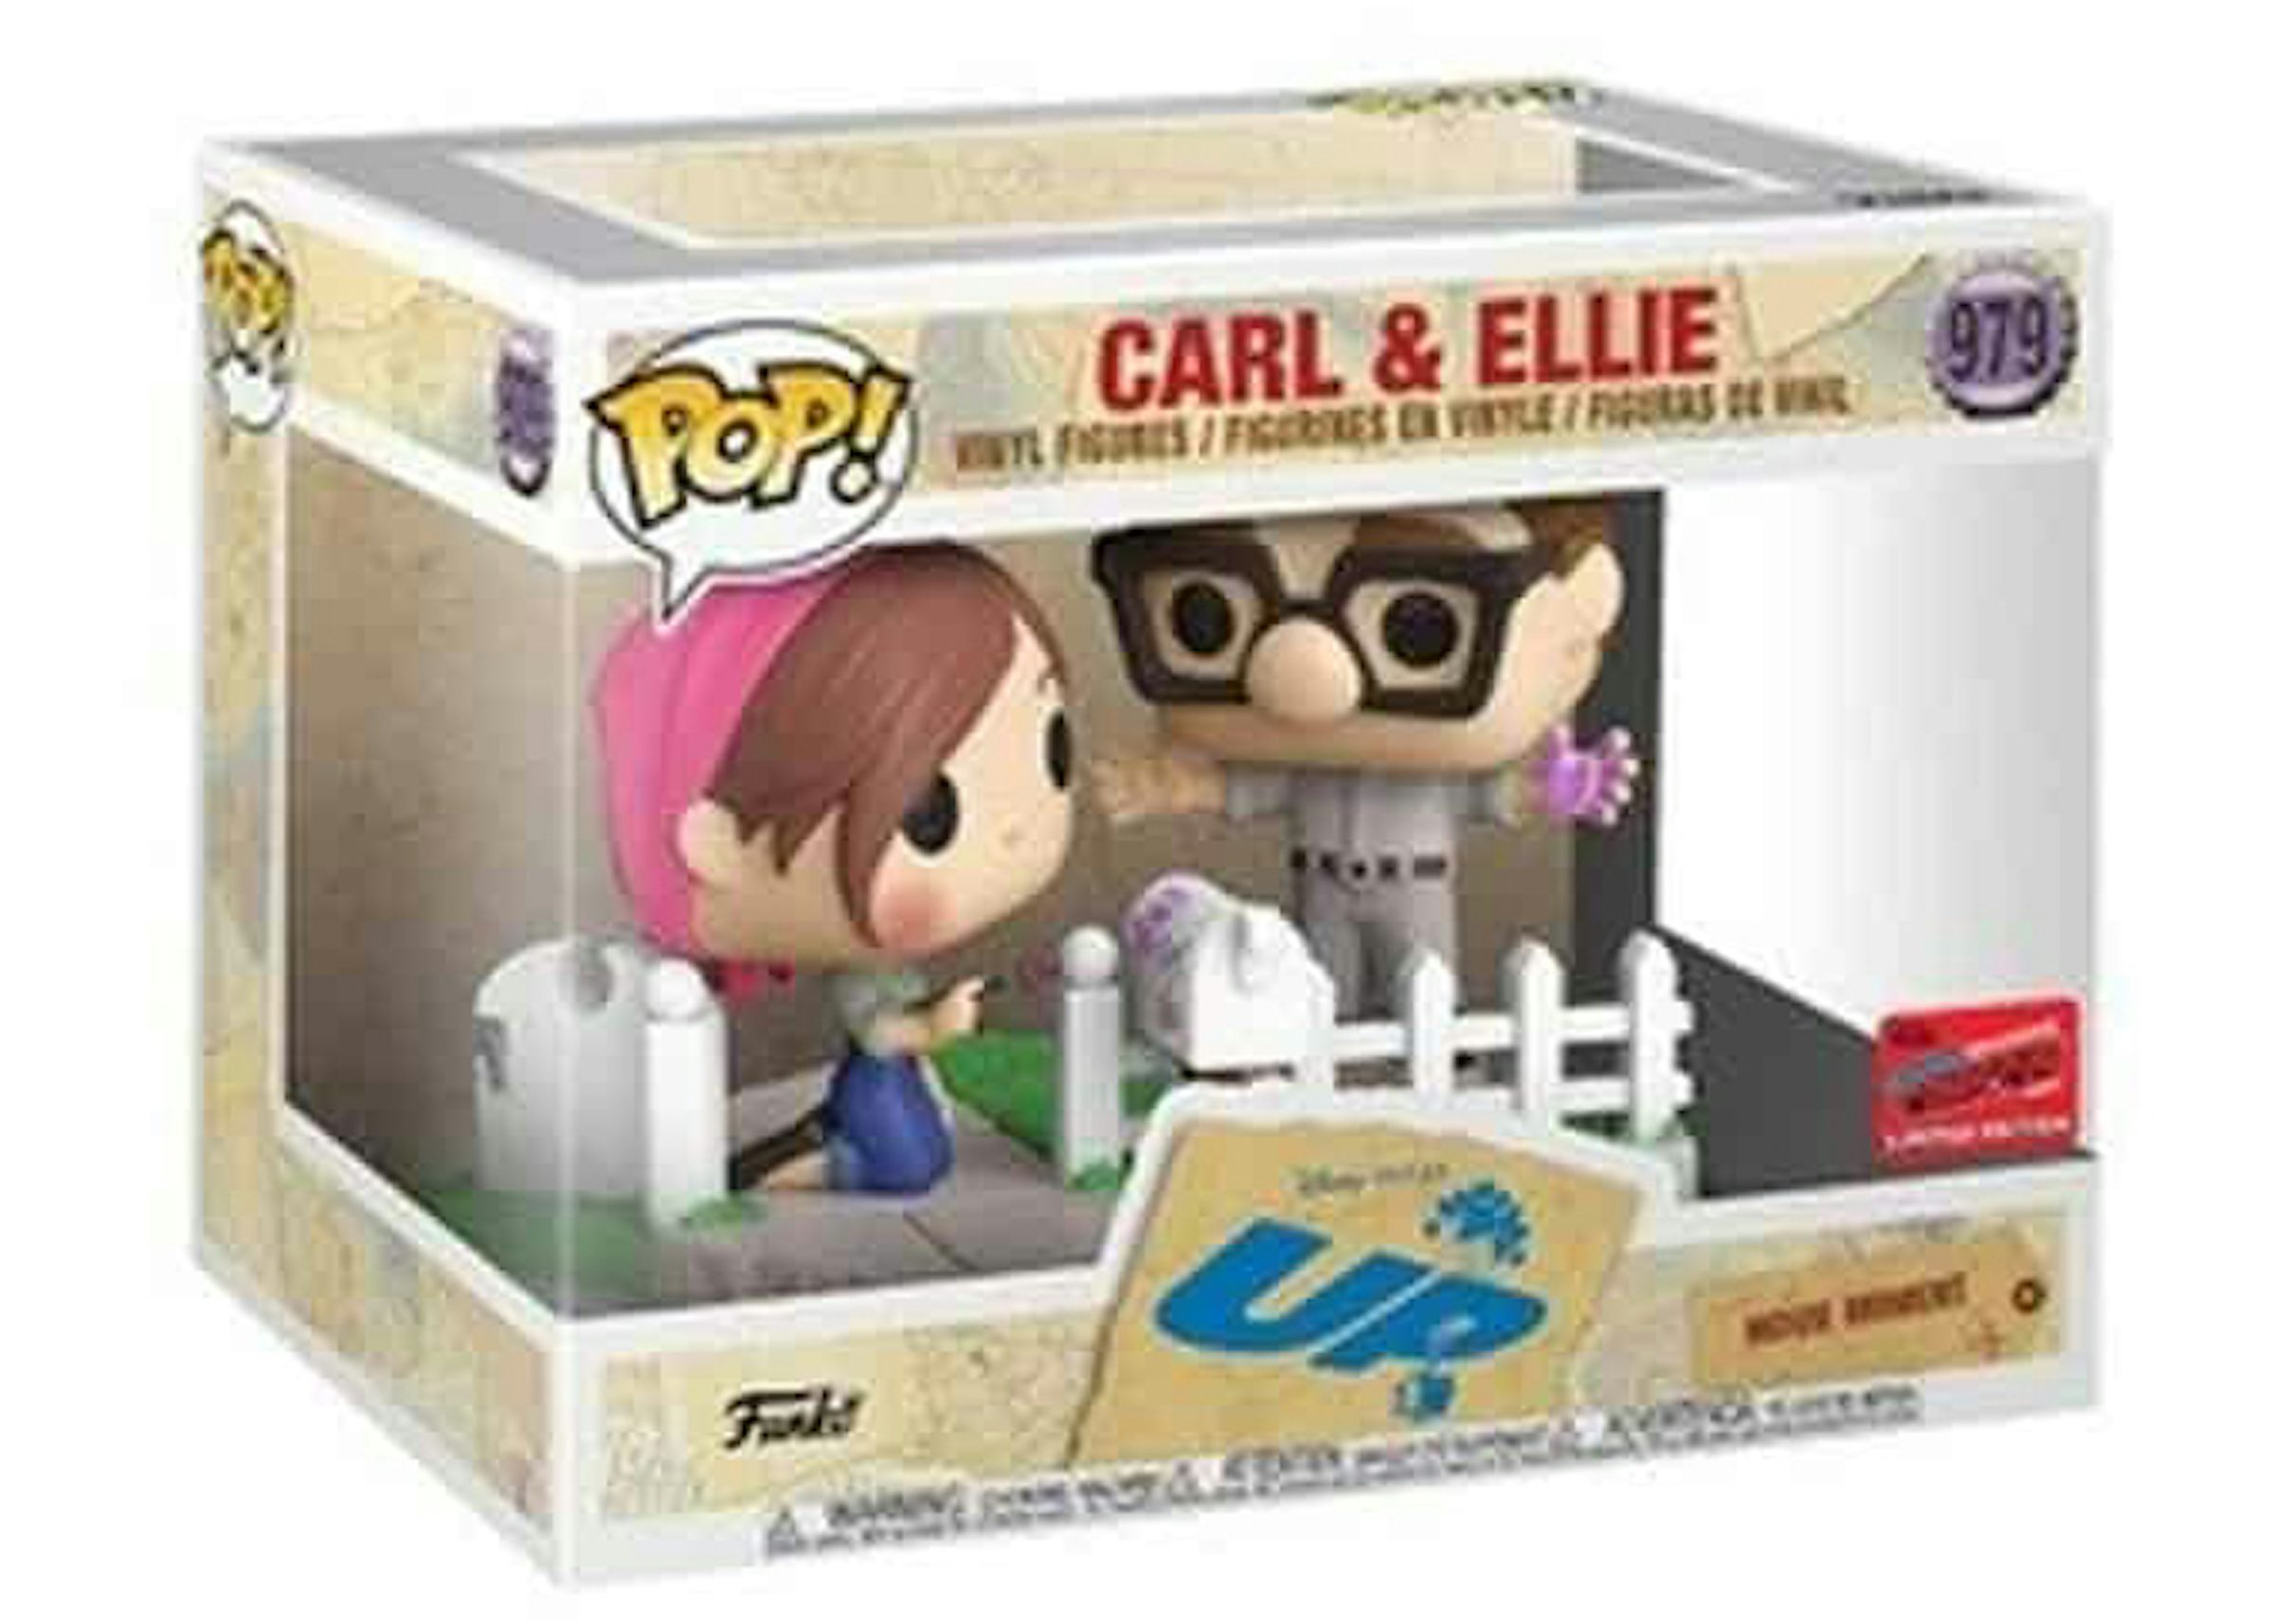 Funko Pop! Disney Carl and Ellie Movie Moment NYCC Exclusive Figure #979 -  IT